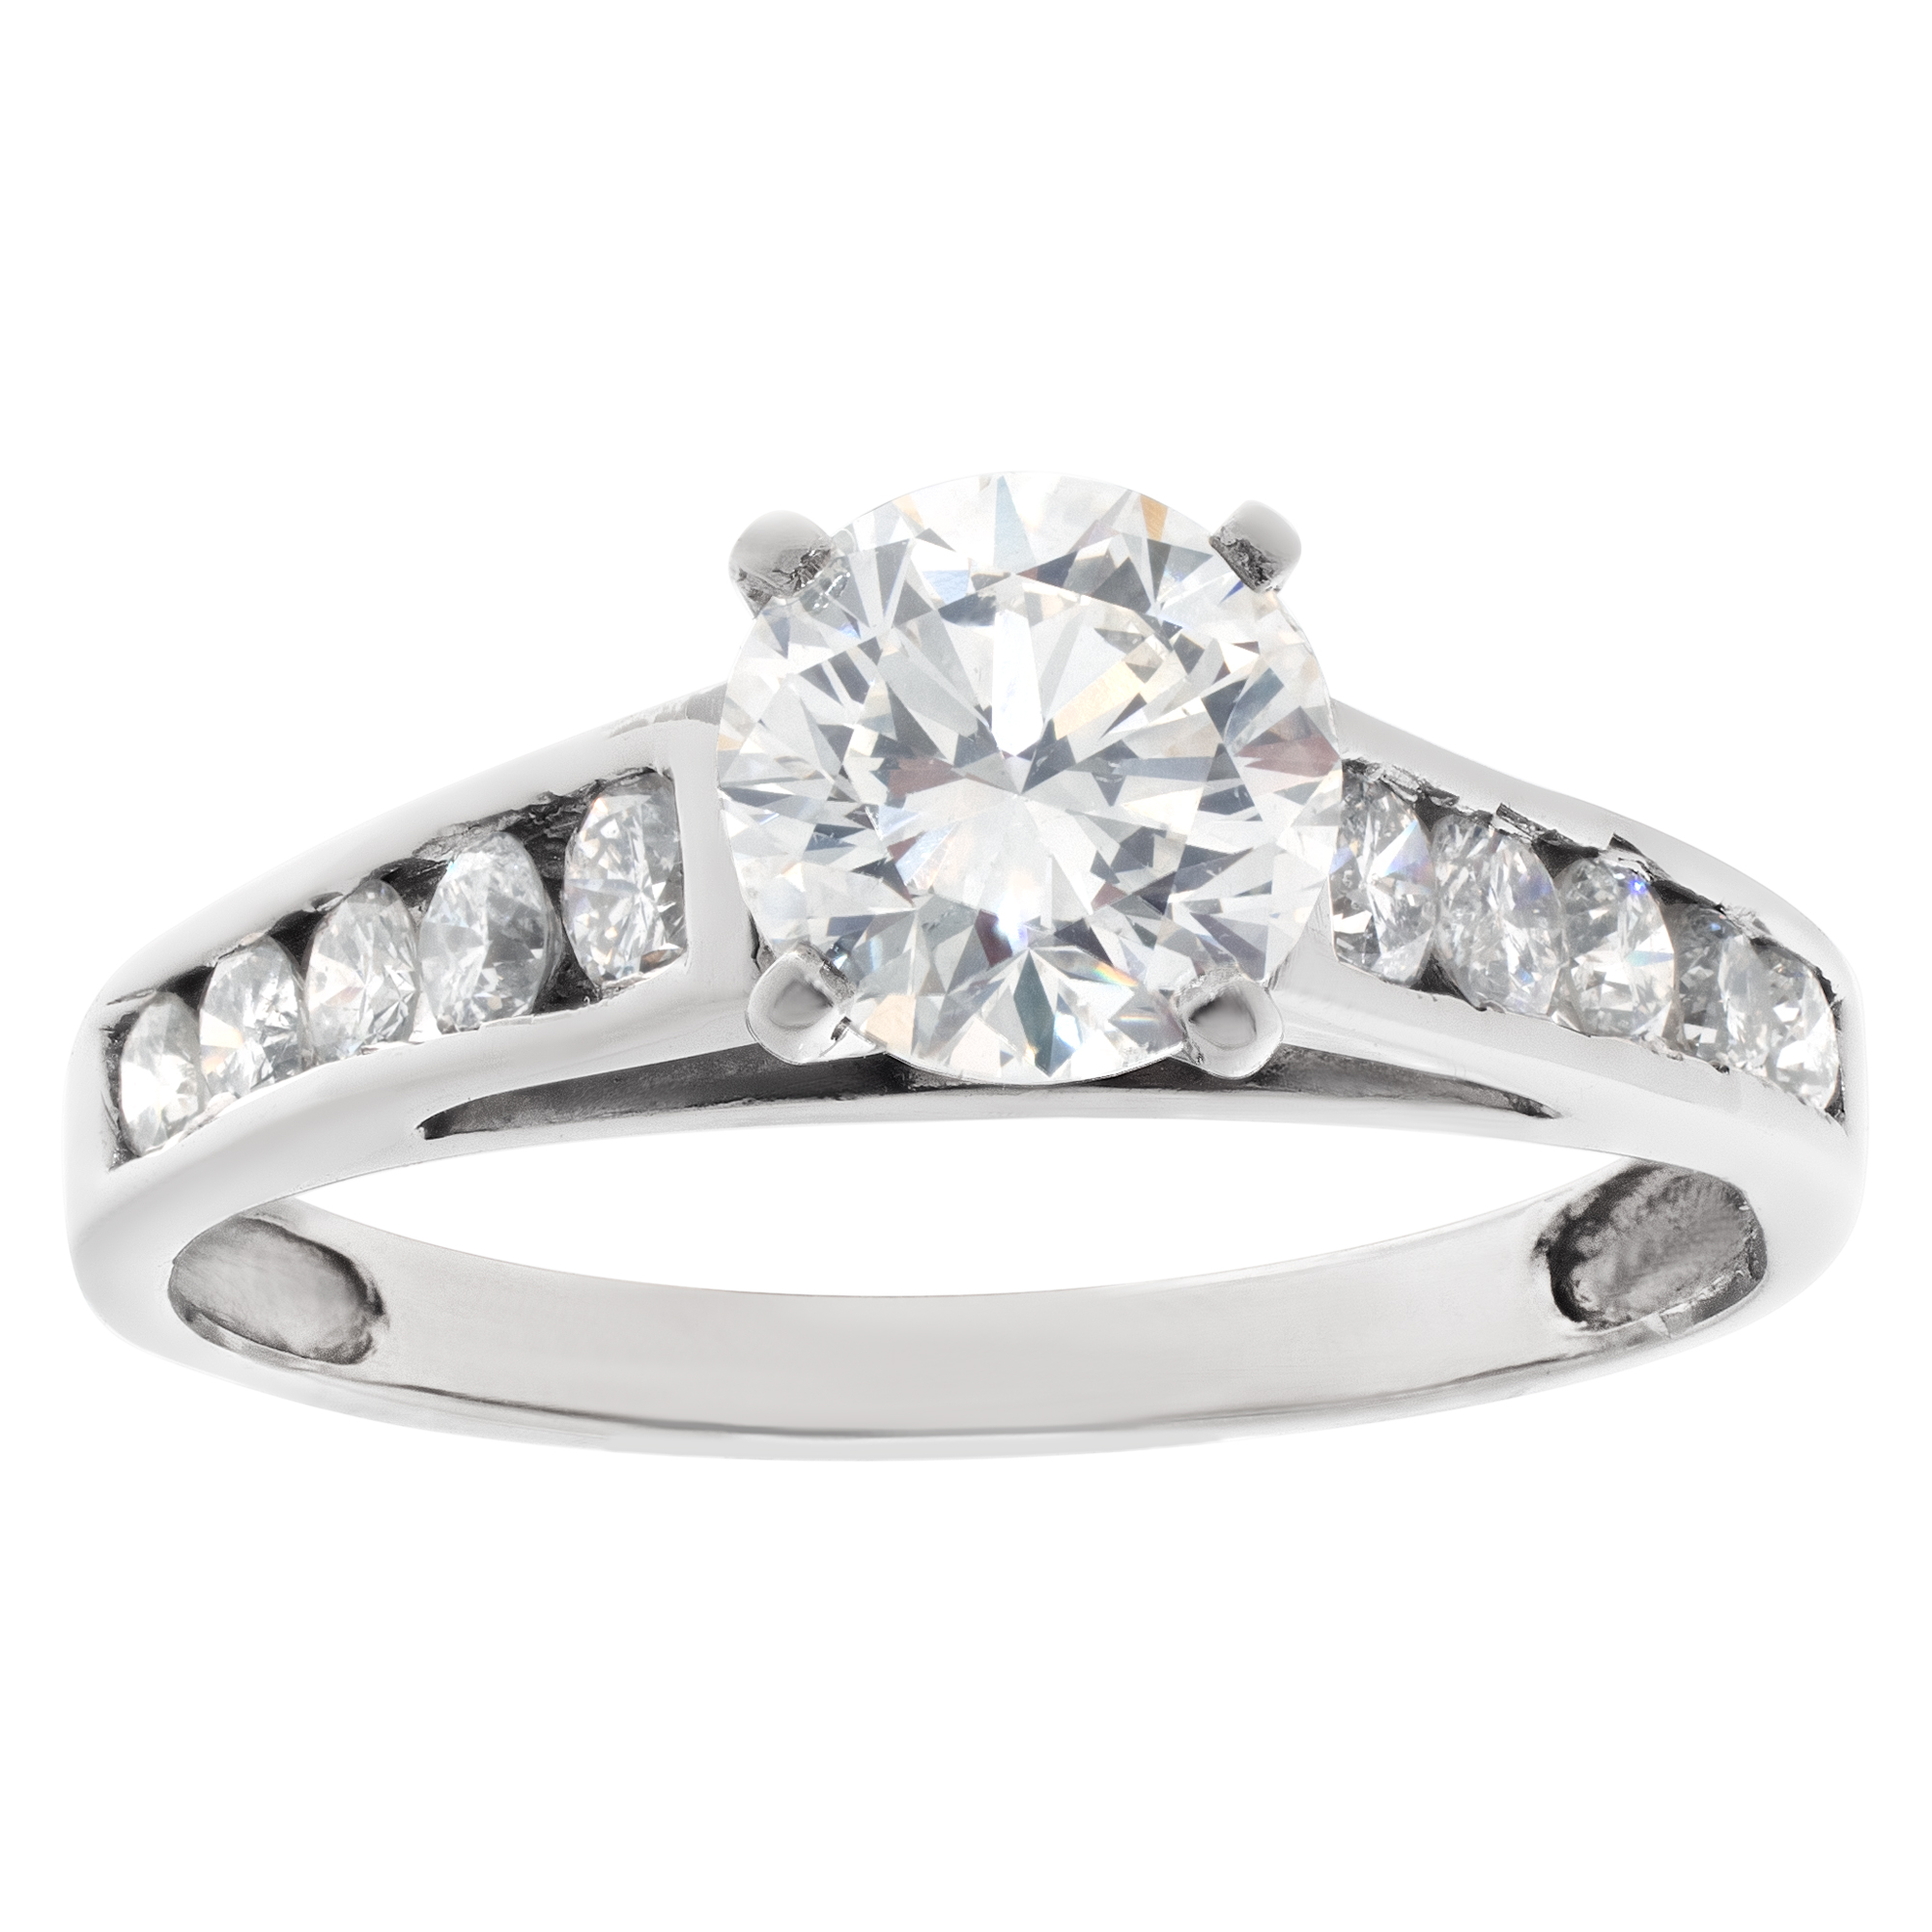 GIA certified round brilliant cut diamond 1 carat (G color, SI1 clarity) ring